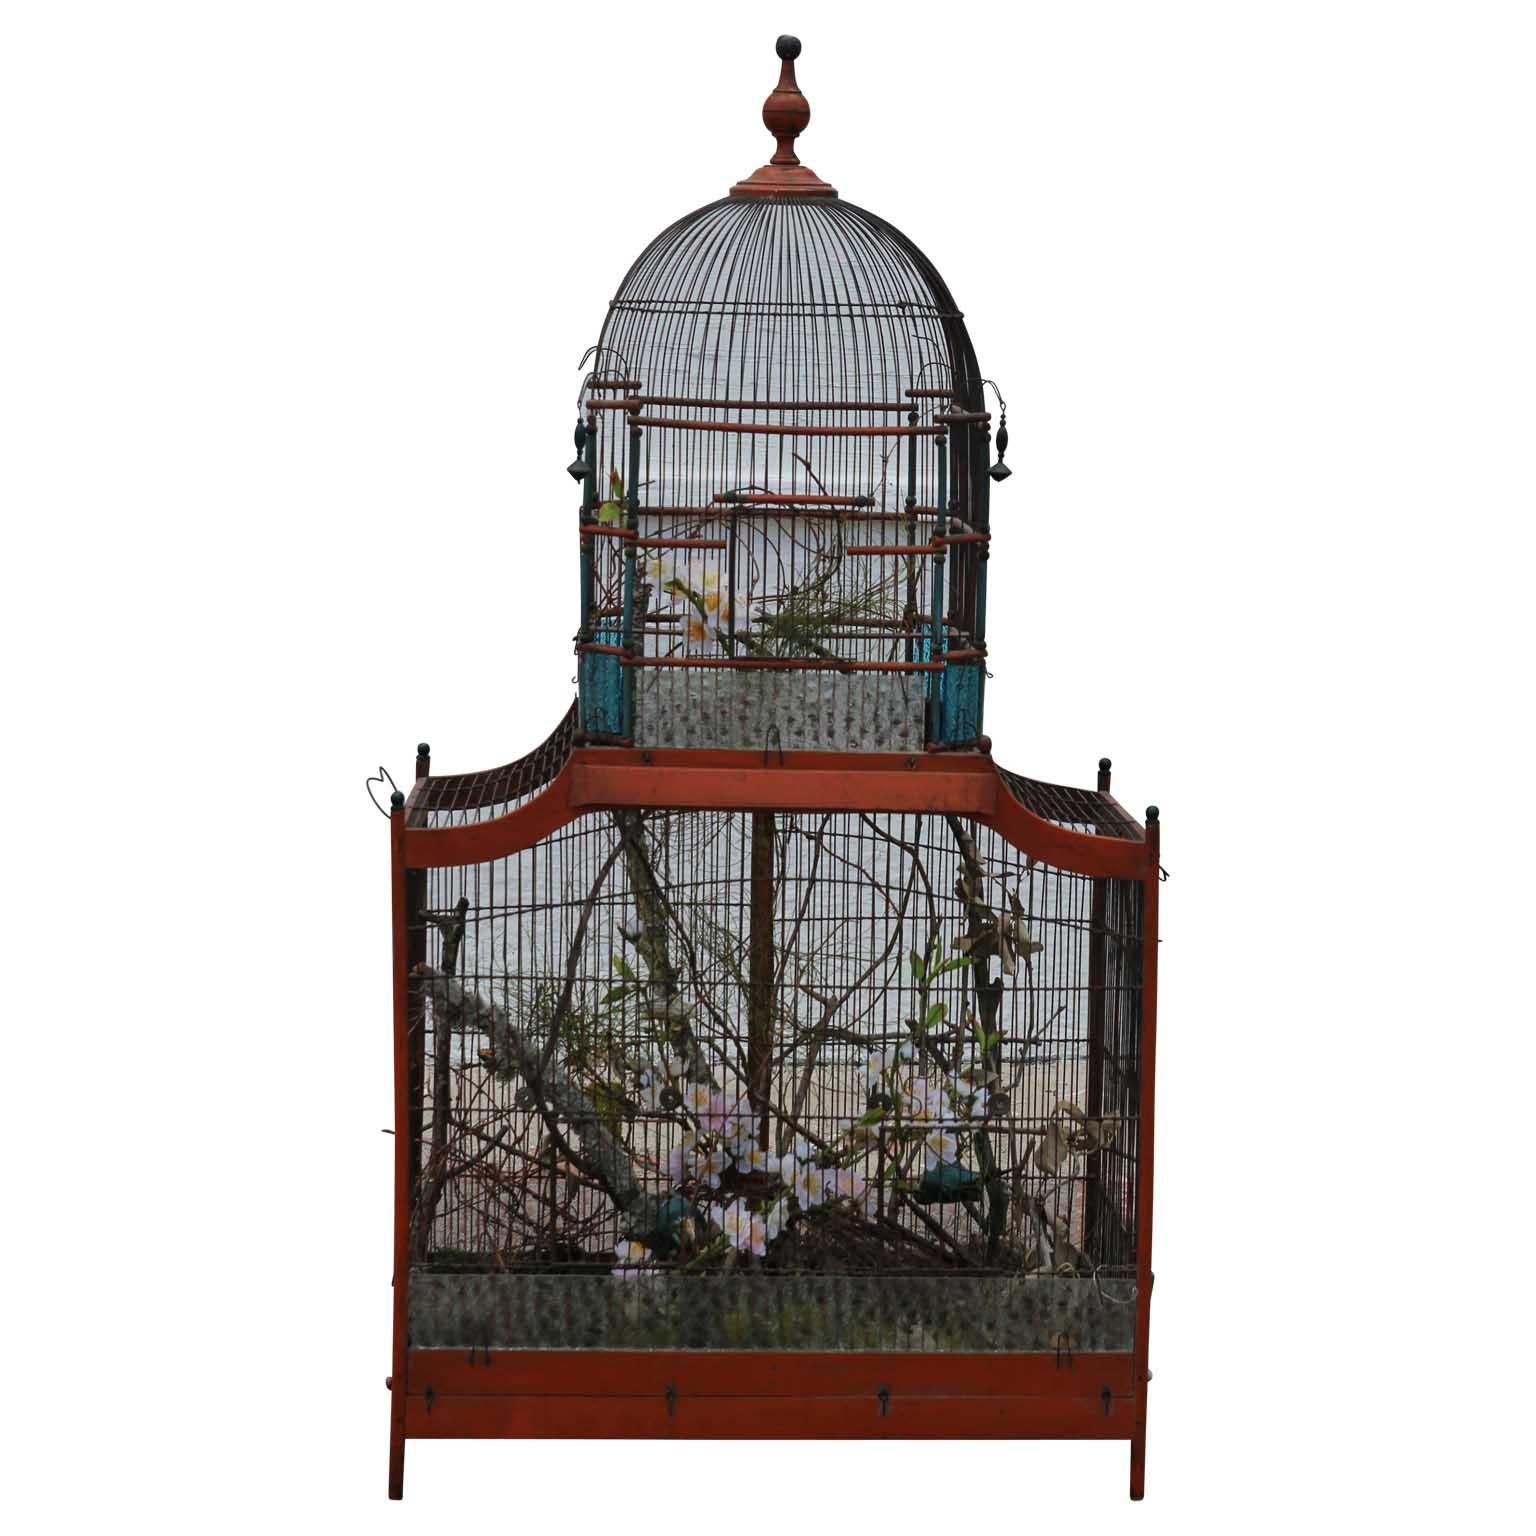 19th century Victorian vintage bird cage with a beautiful top cupola. The metal cage is accented with a wooden frame, wooden spires, and glass panels. Comes with existing foliage decoration.